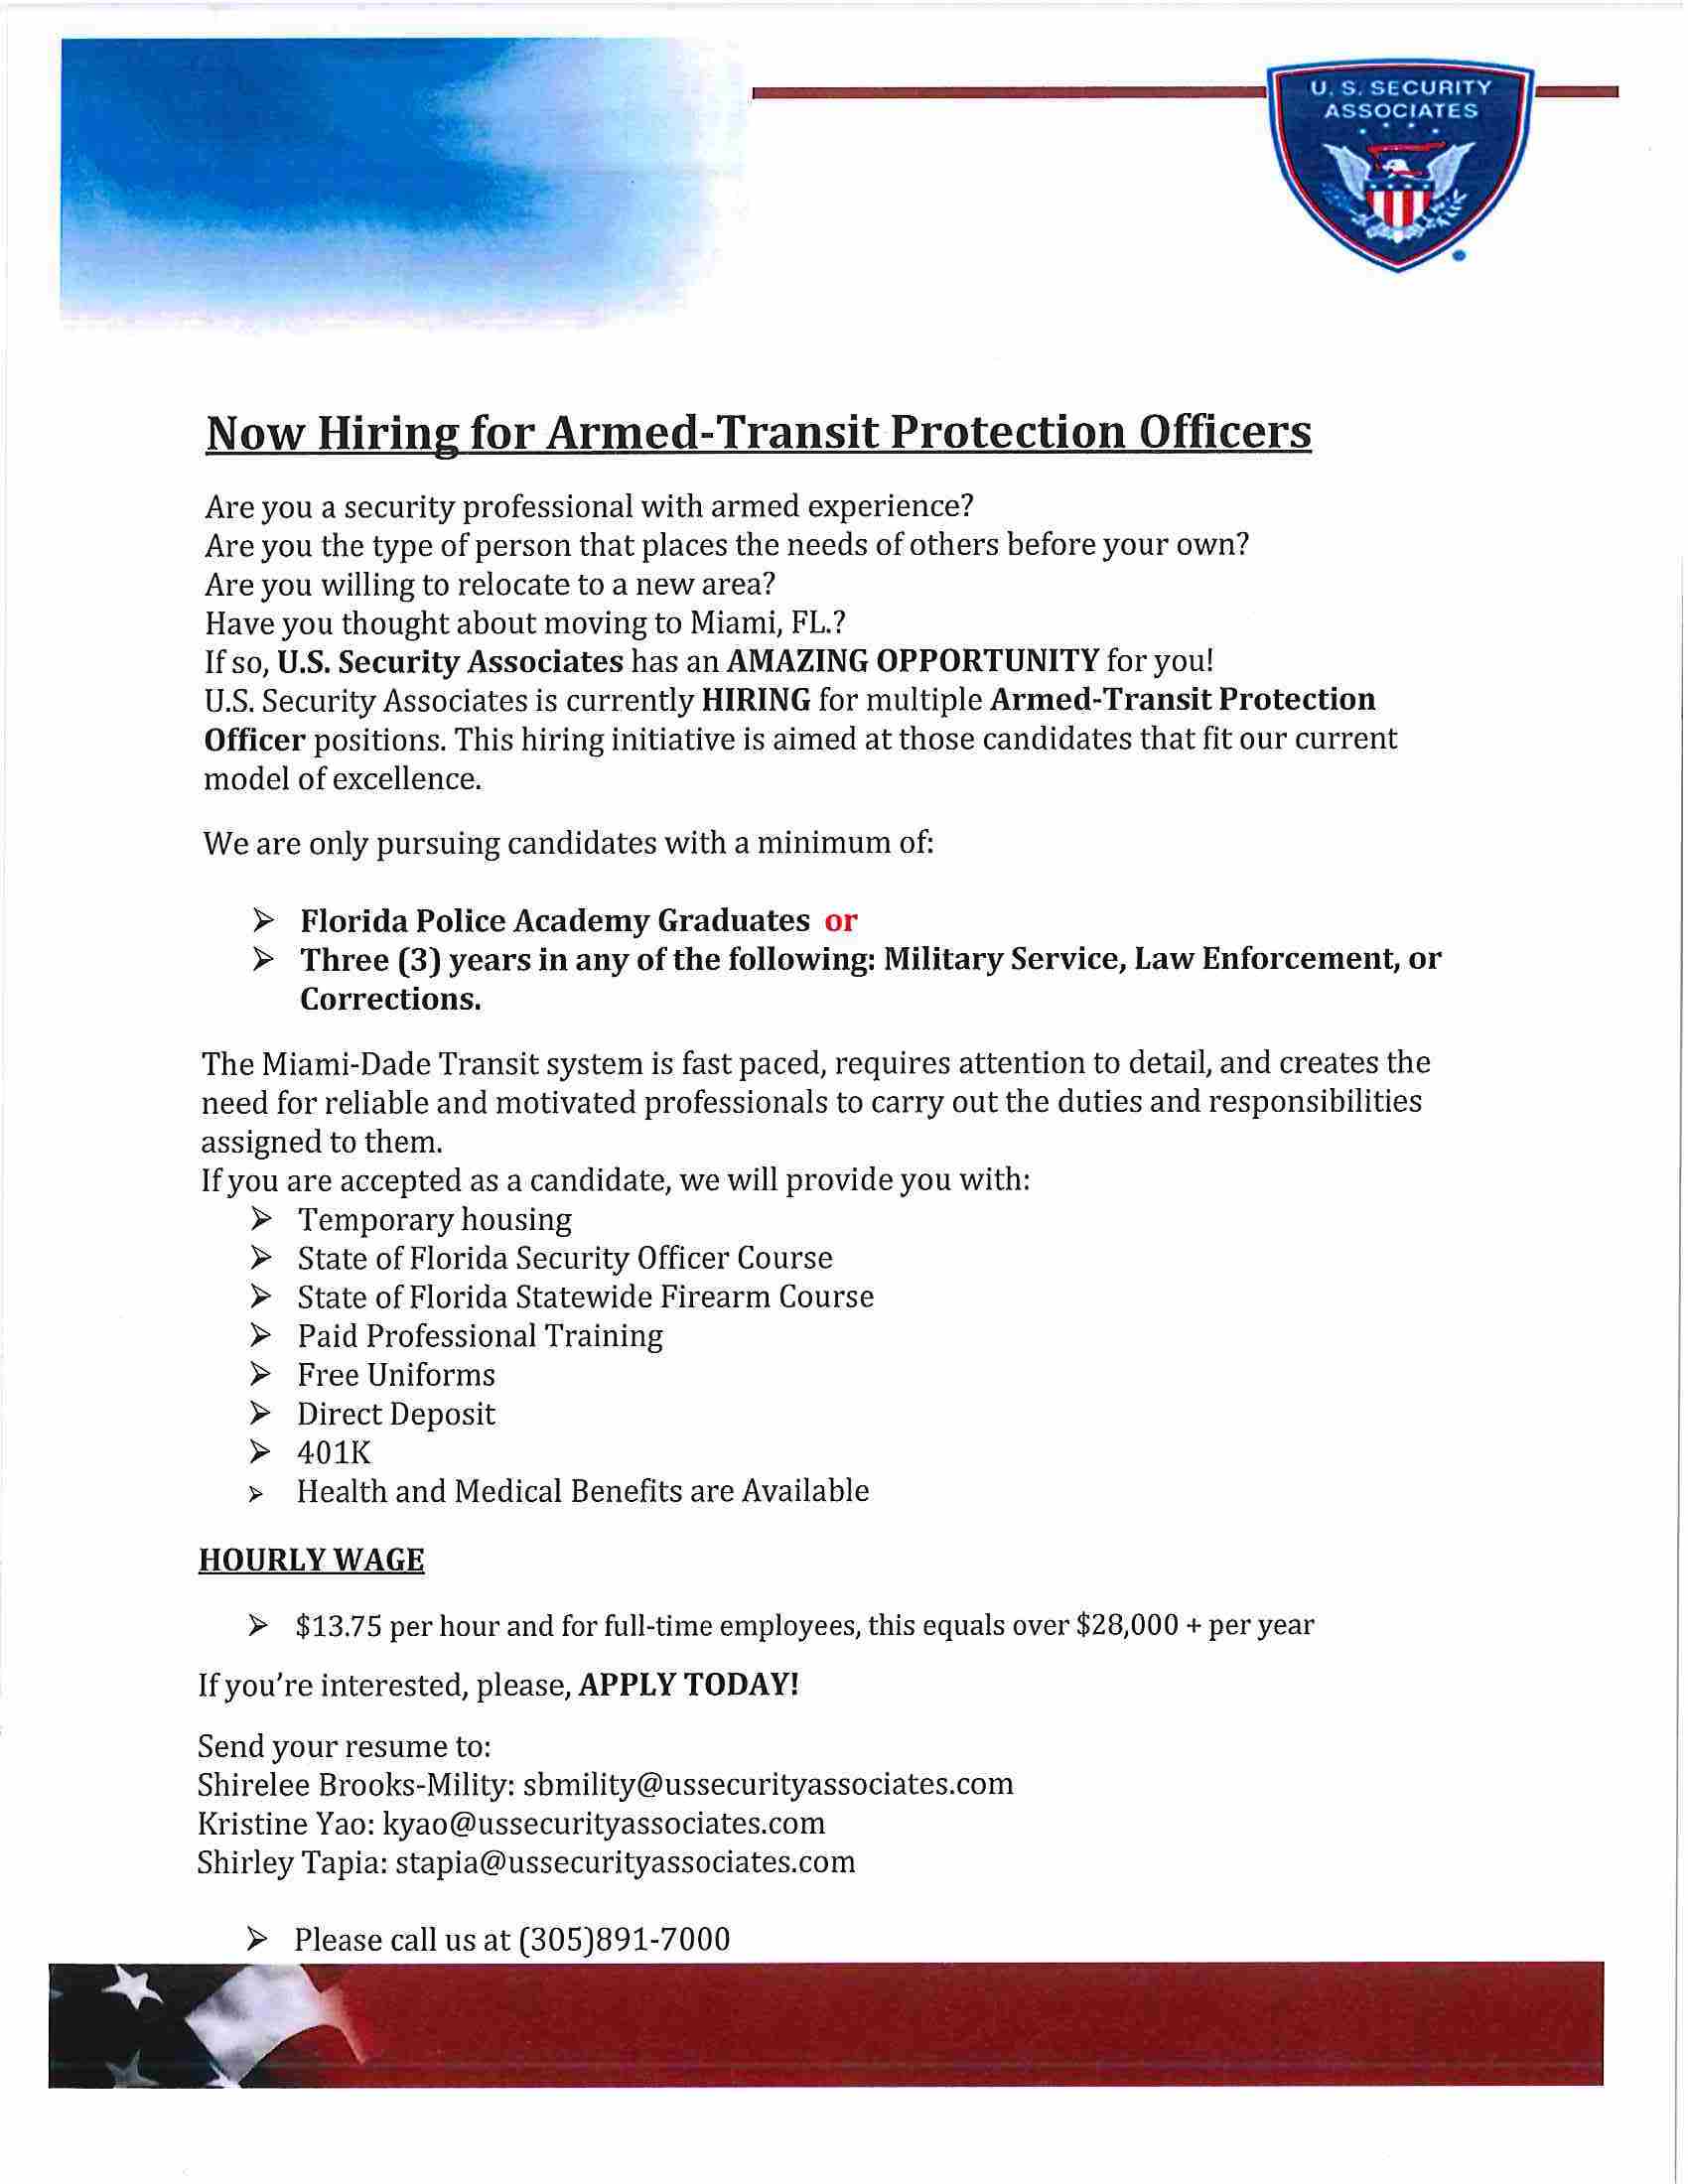 U.S. Security Associates Hiring Armed-Transit Protection Officers – Miami, FL